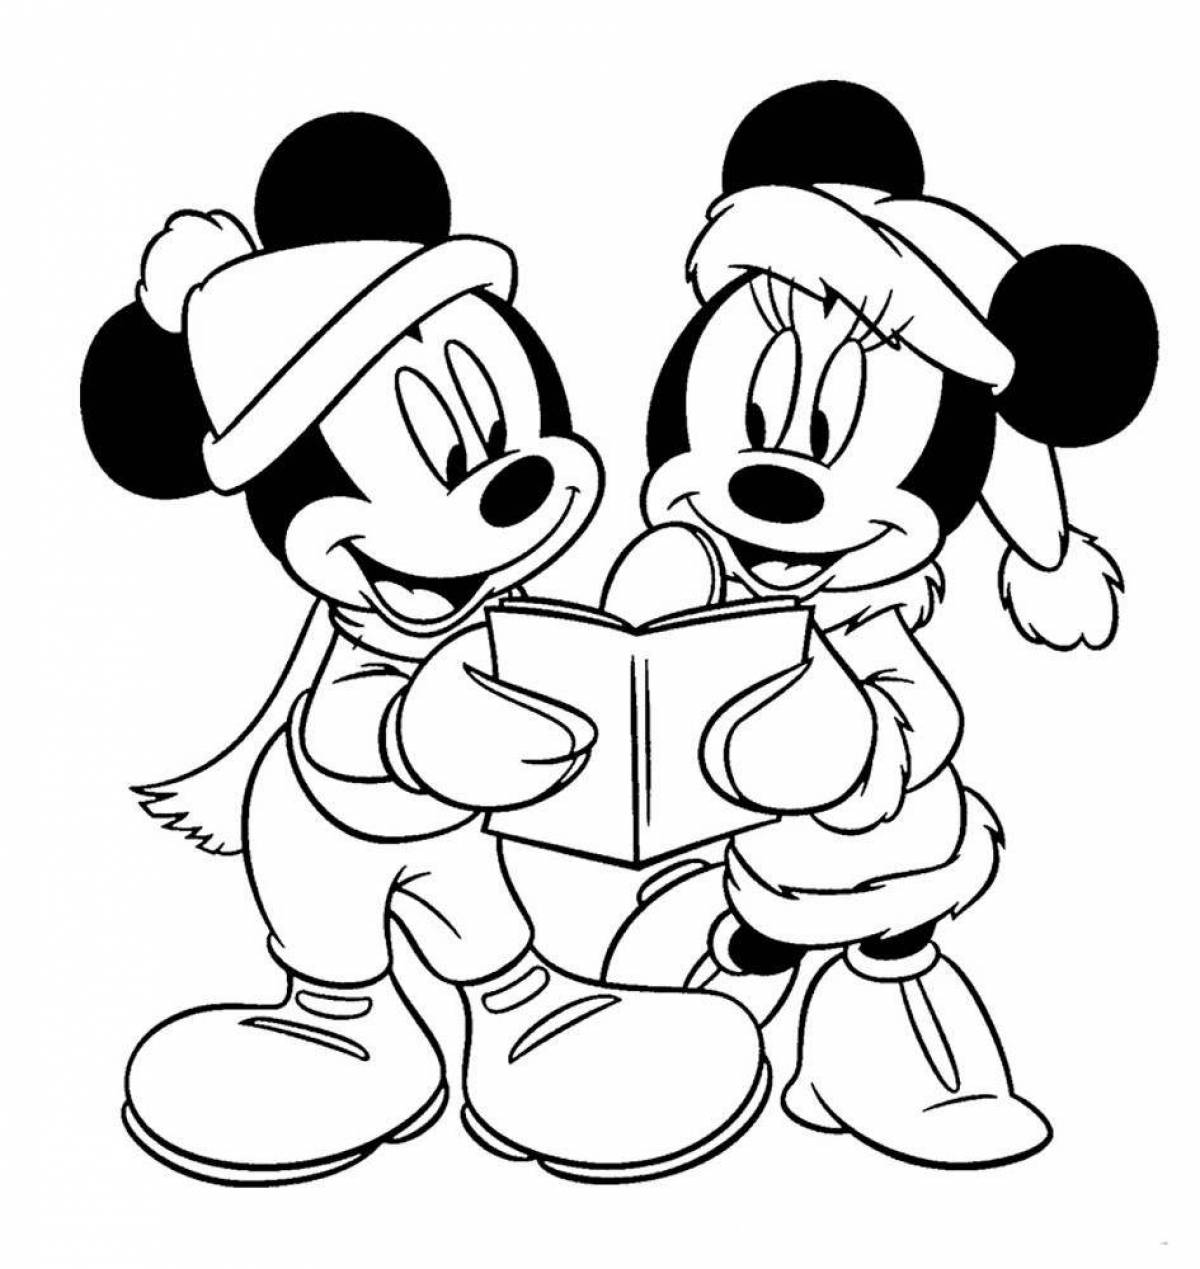 Coloring book regal mickey mouse new year